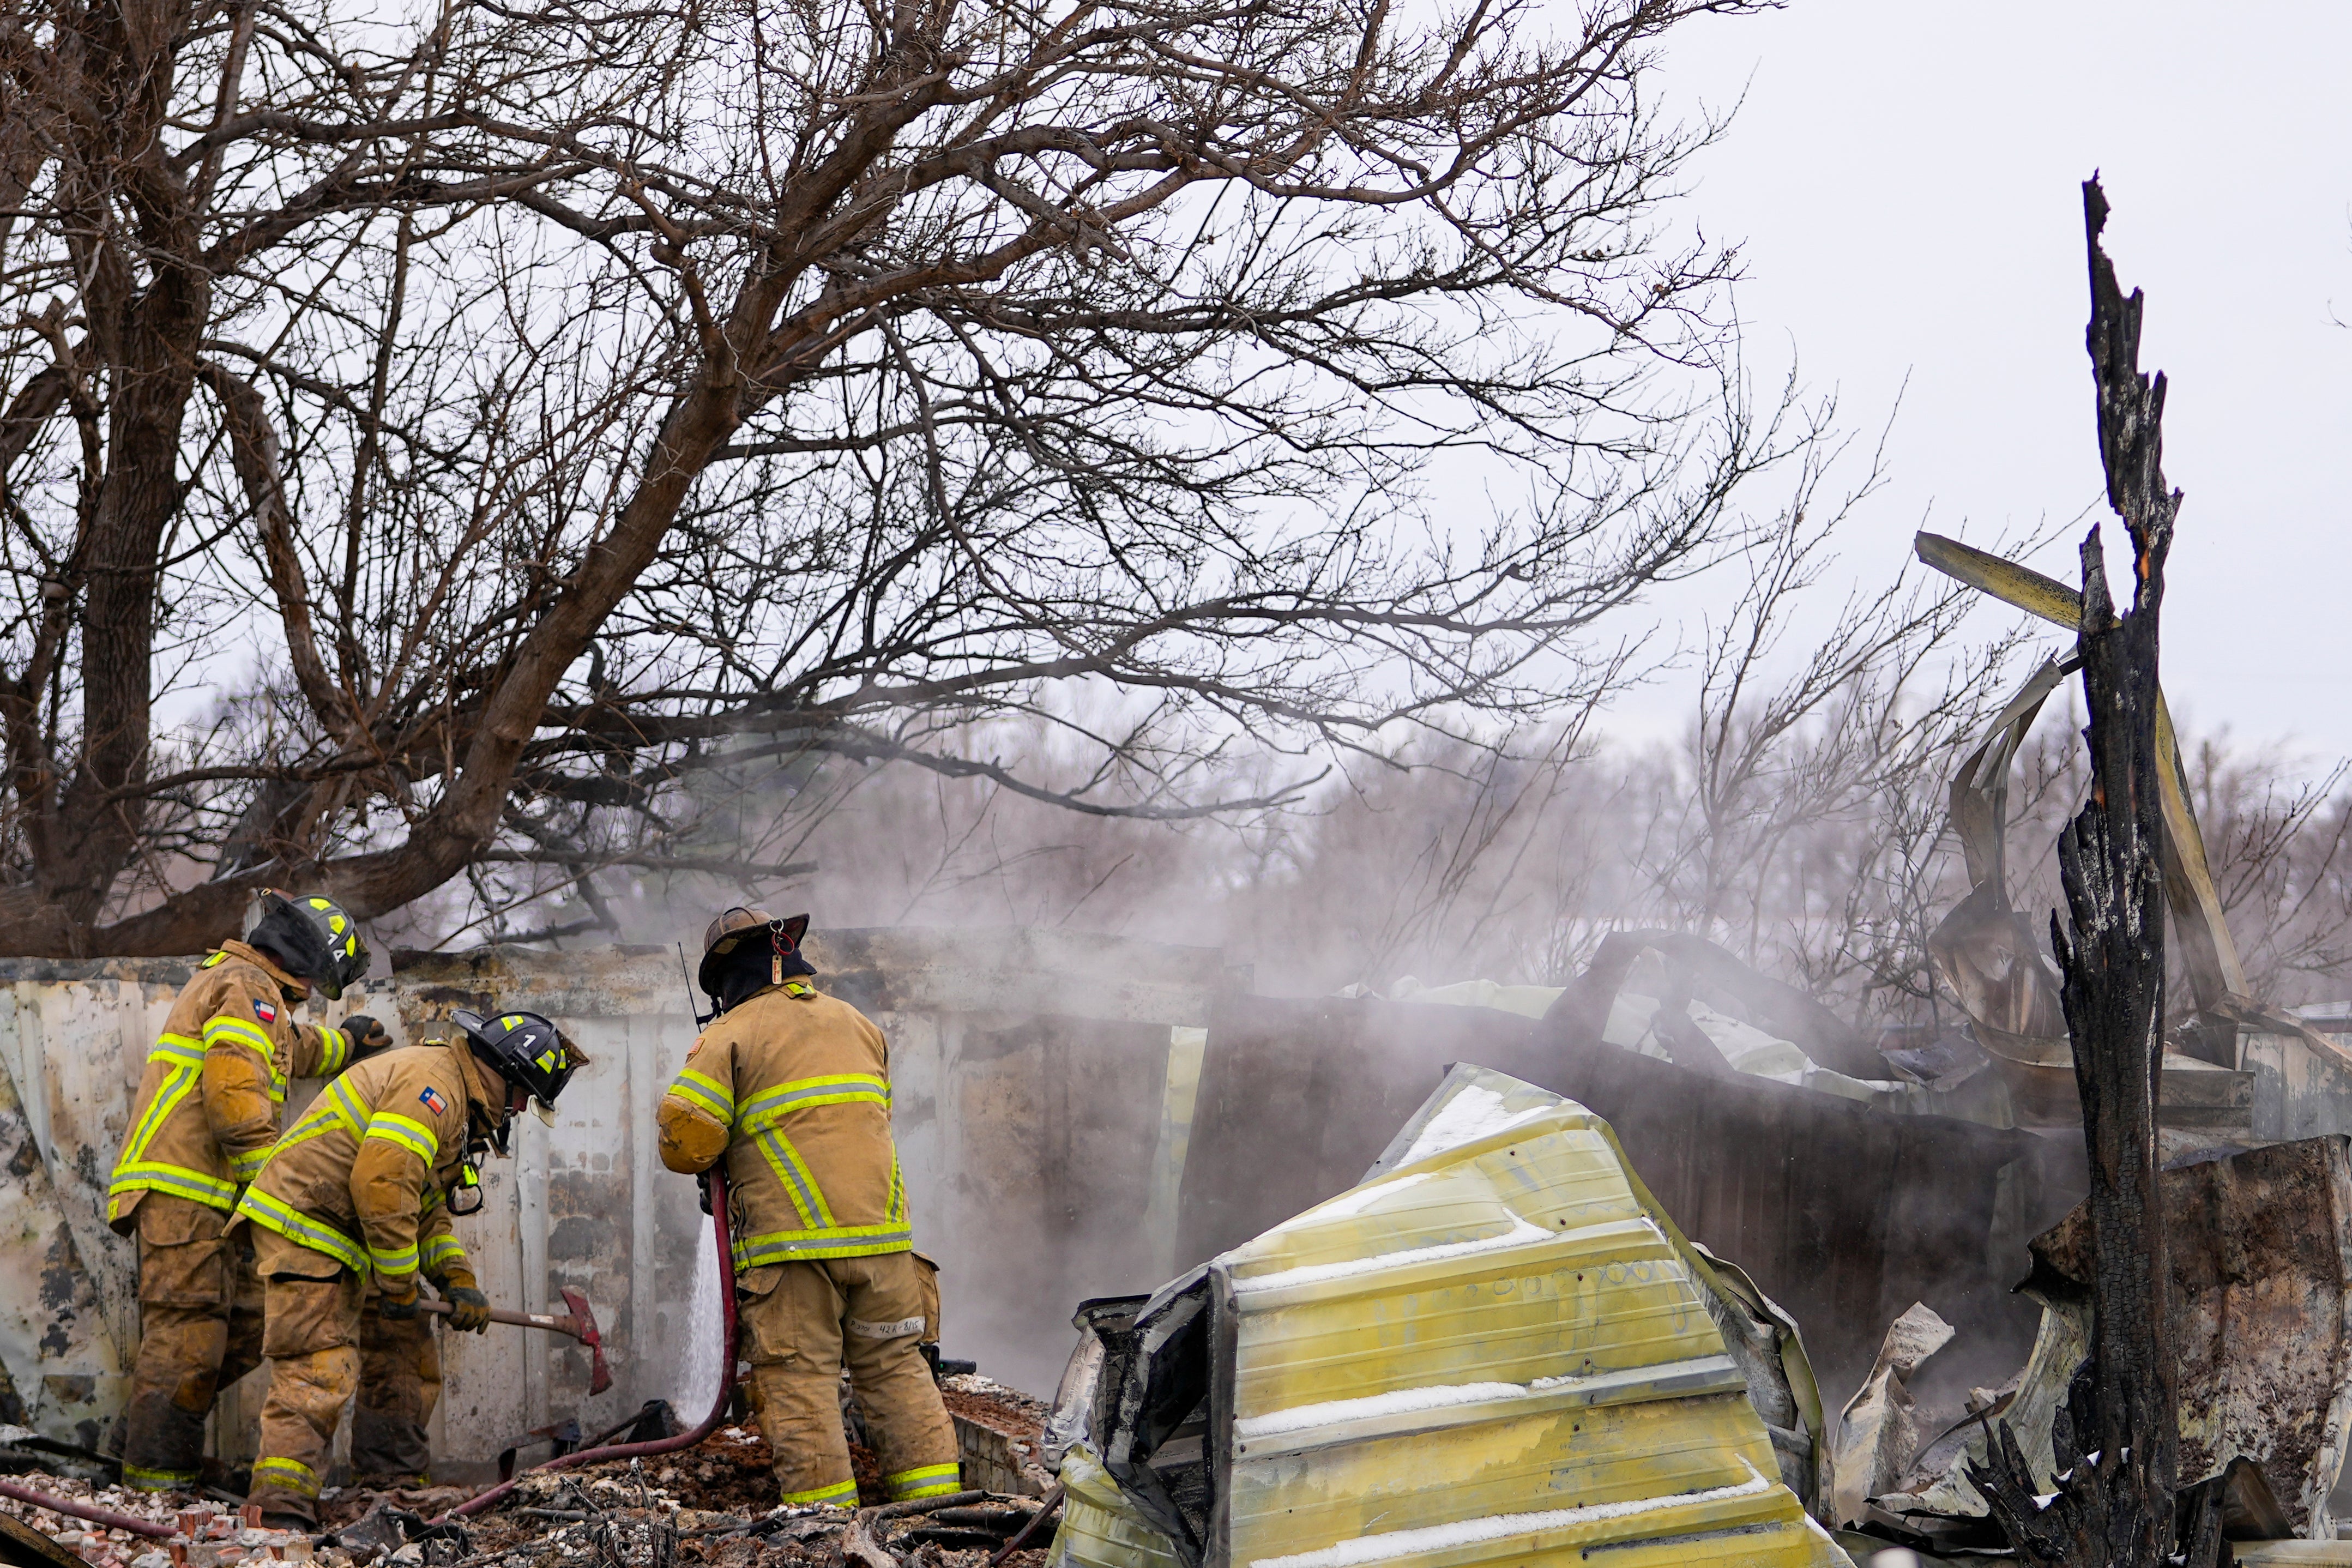 Fire officials from Lubbock, Texas, help put out smouldering debris of a home destroyed by the Smokehouse Creek Fire